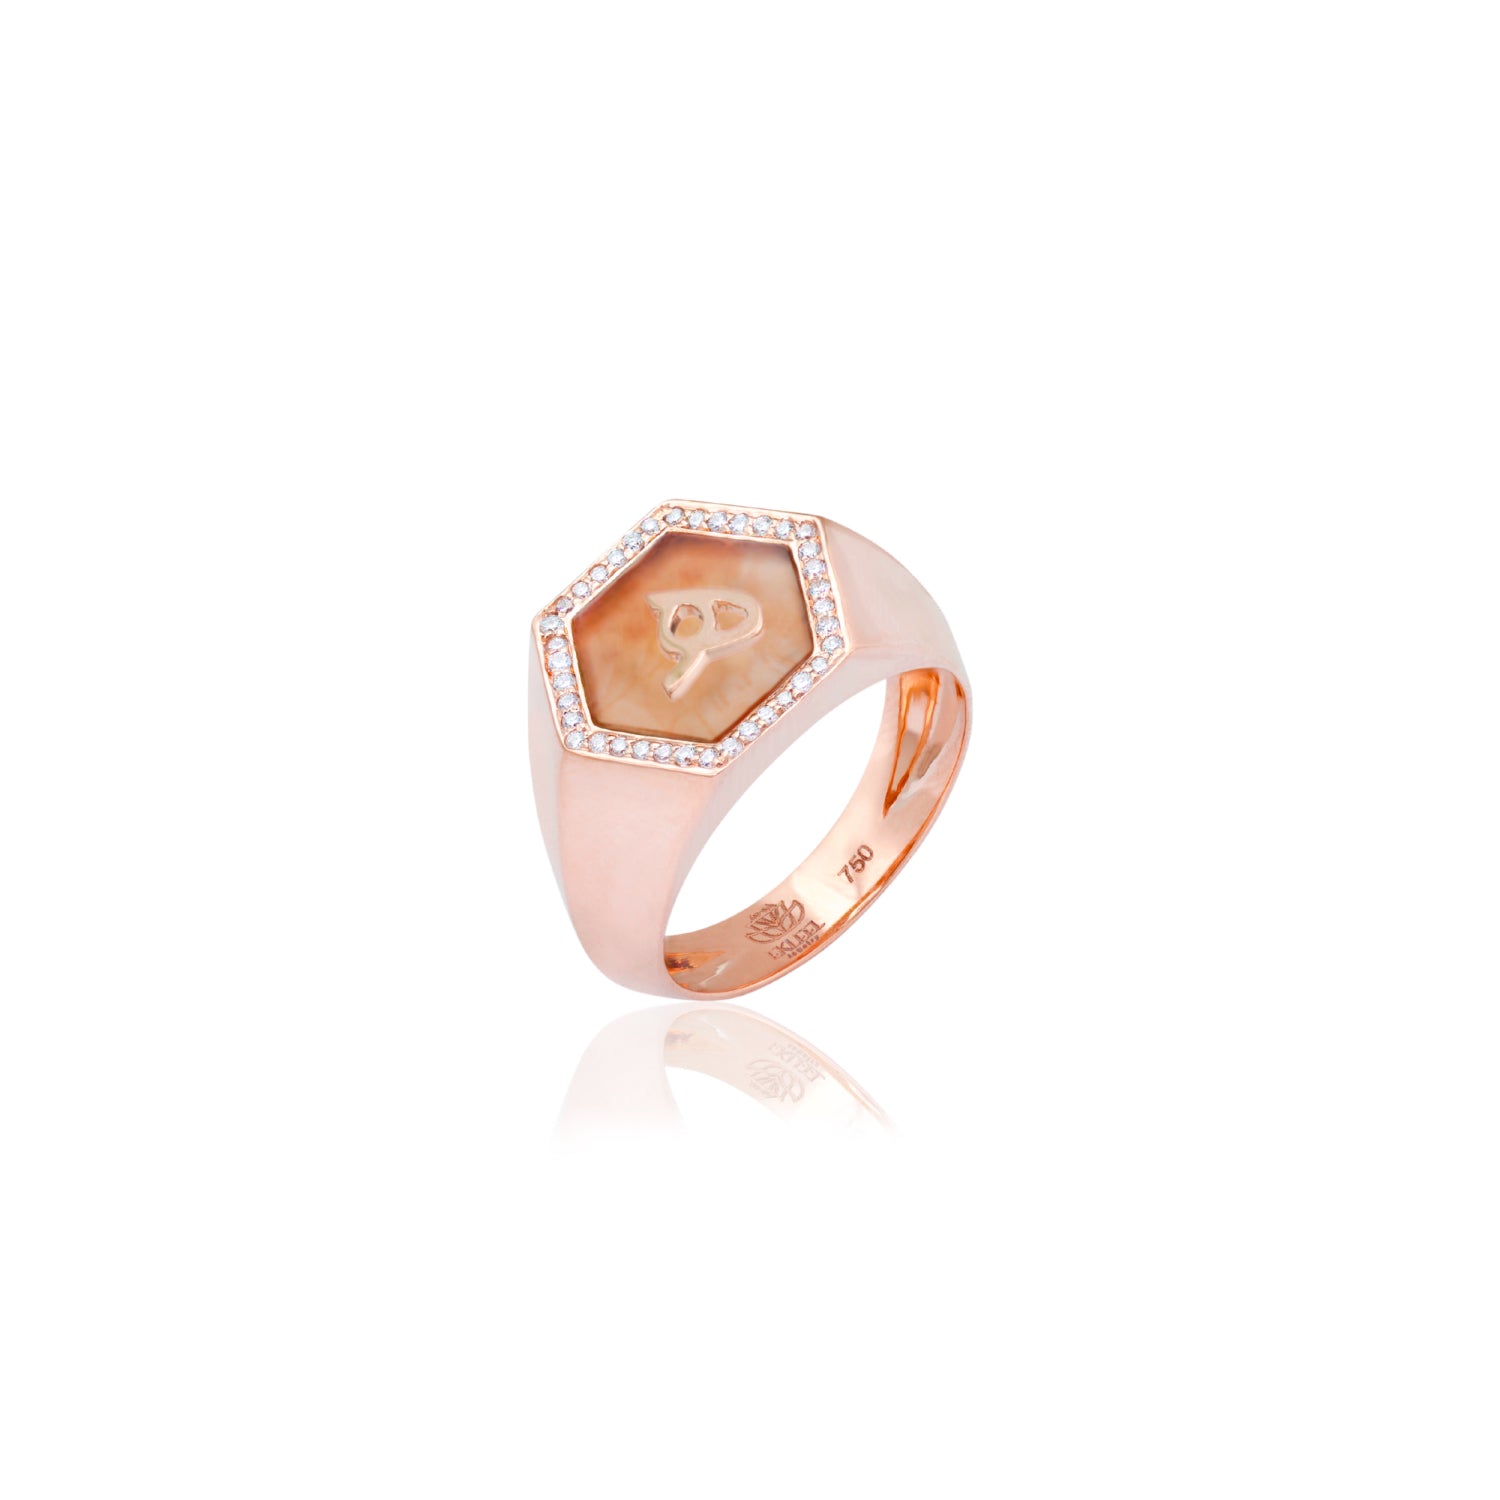 Qamoos 2.0 Letter هـ Carnelian and Diamond Signet Ring in Rose Gold